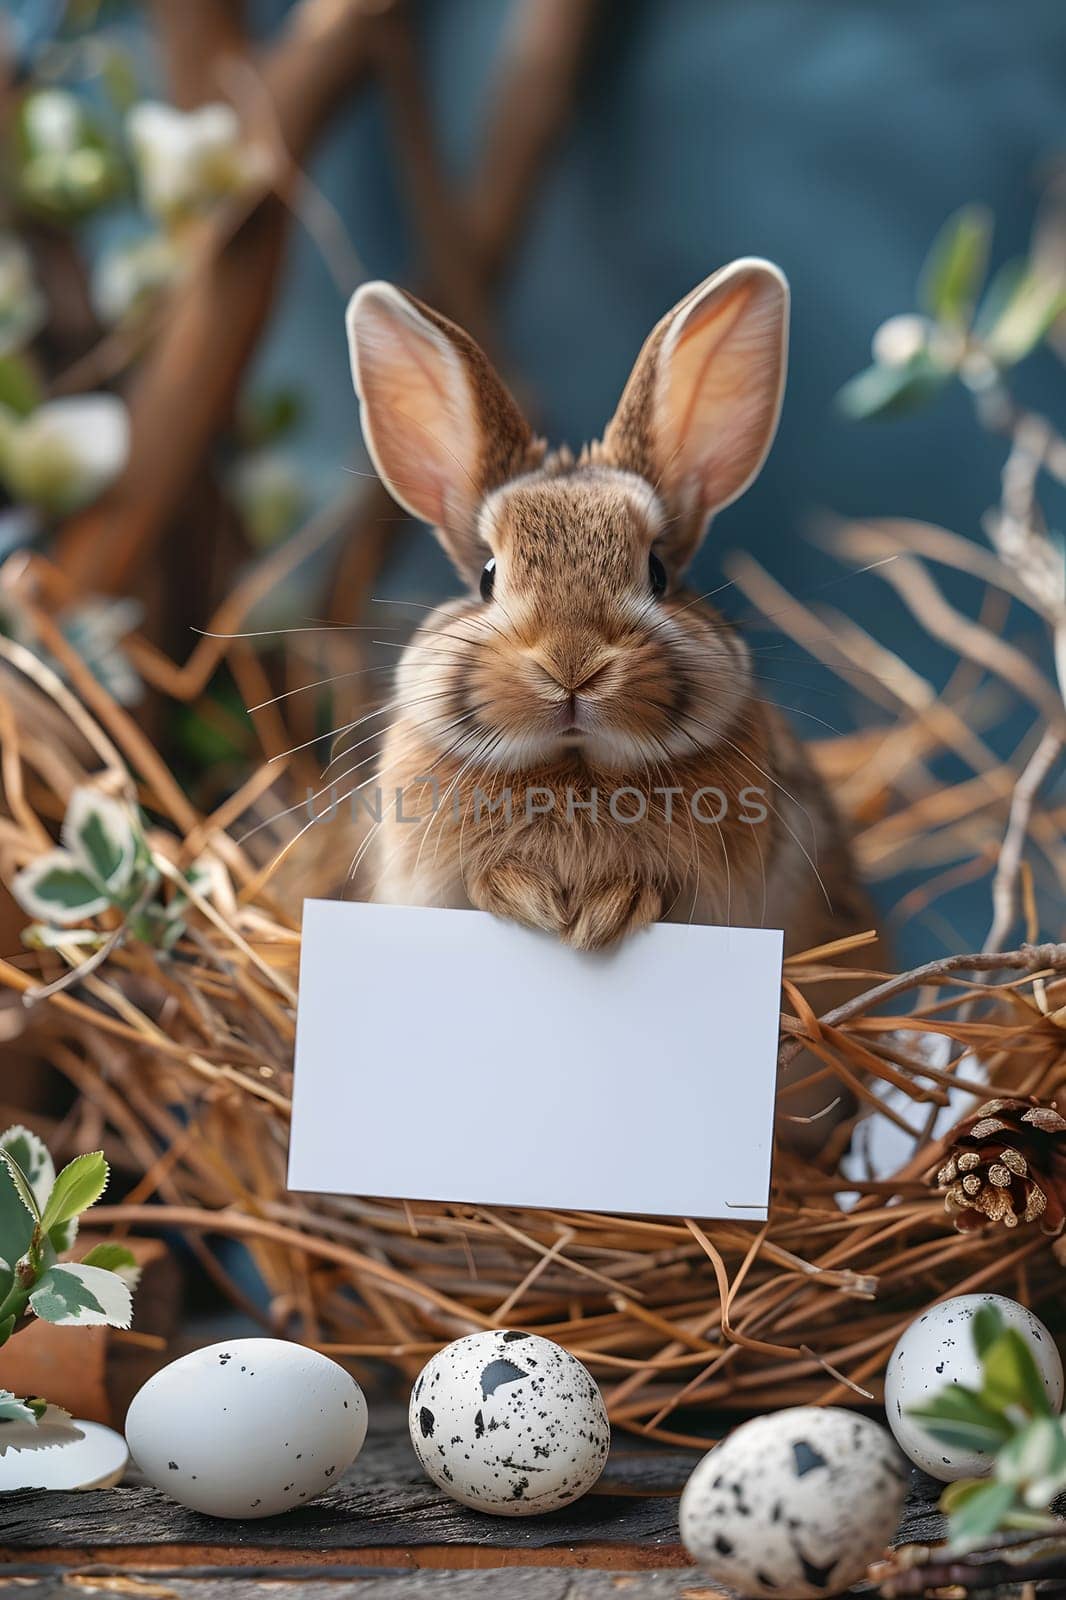 A wood rabbit, also known as Audubons Cottontail, is sitting in a nest made of natural materials, holding a sign. This terrestrial animal has a fluffy tail and a twitching snout